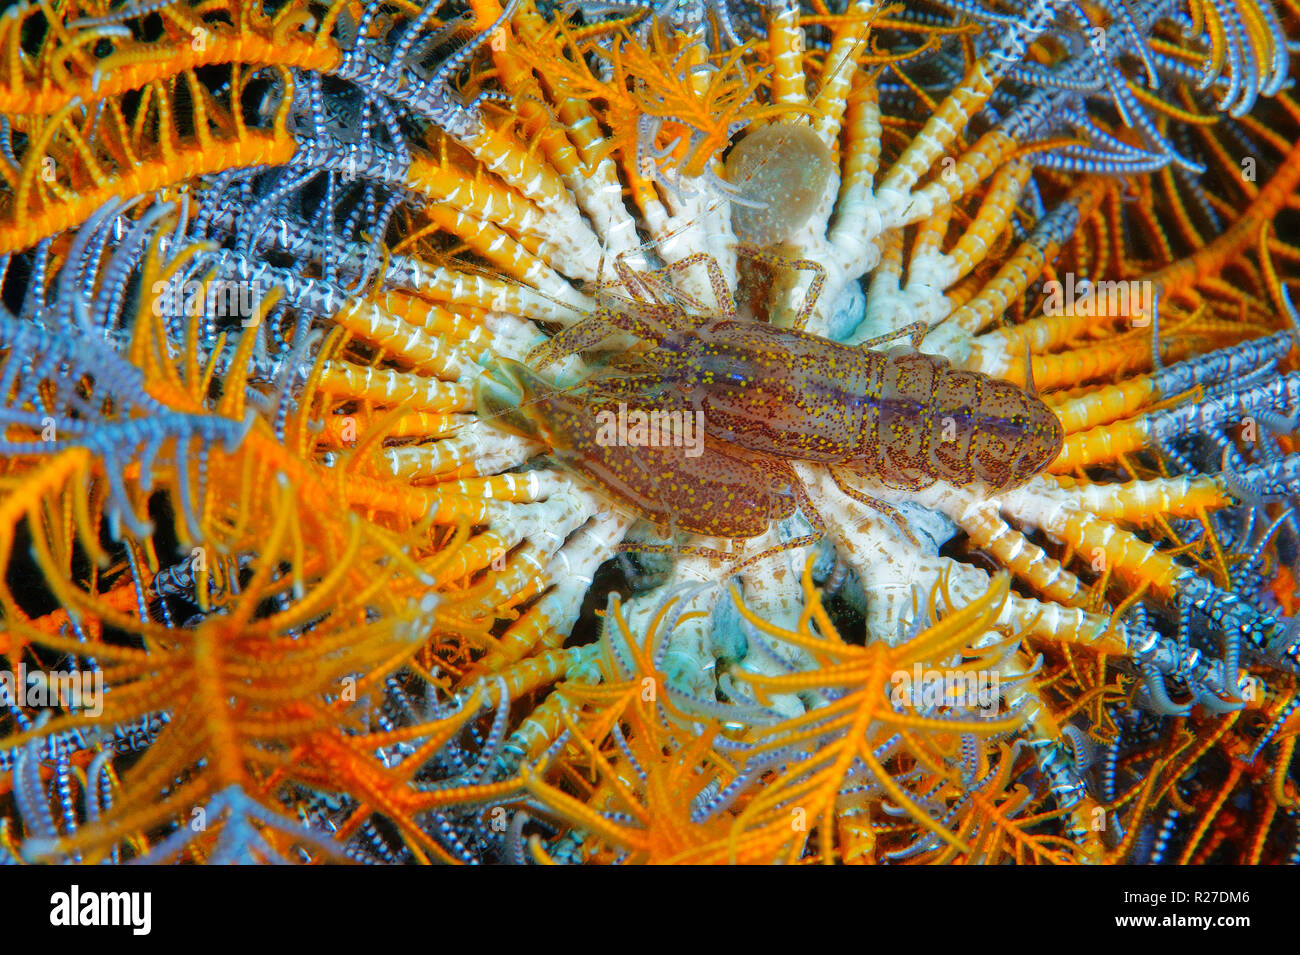 Stimpson's Snapping Shrimp (Synalpheus stimpsoni), inhabits only the central disc of crinoids  (Comanthus sp.), Halmahera, Moluccas Sea, Indonesia Stock Photo